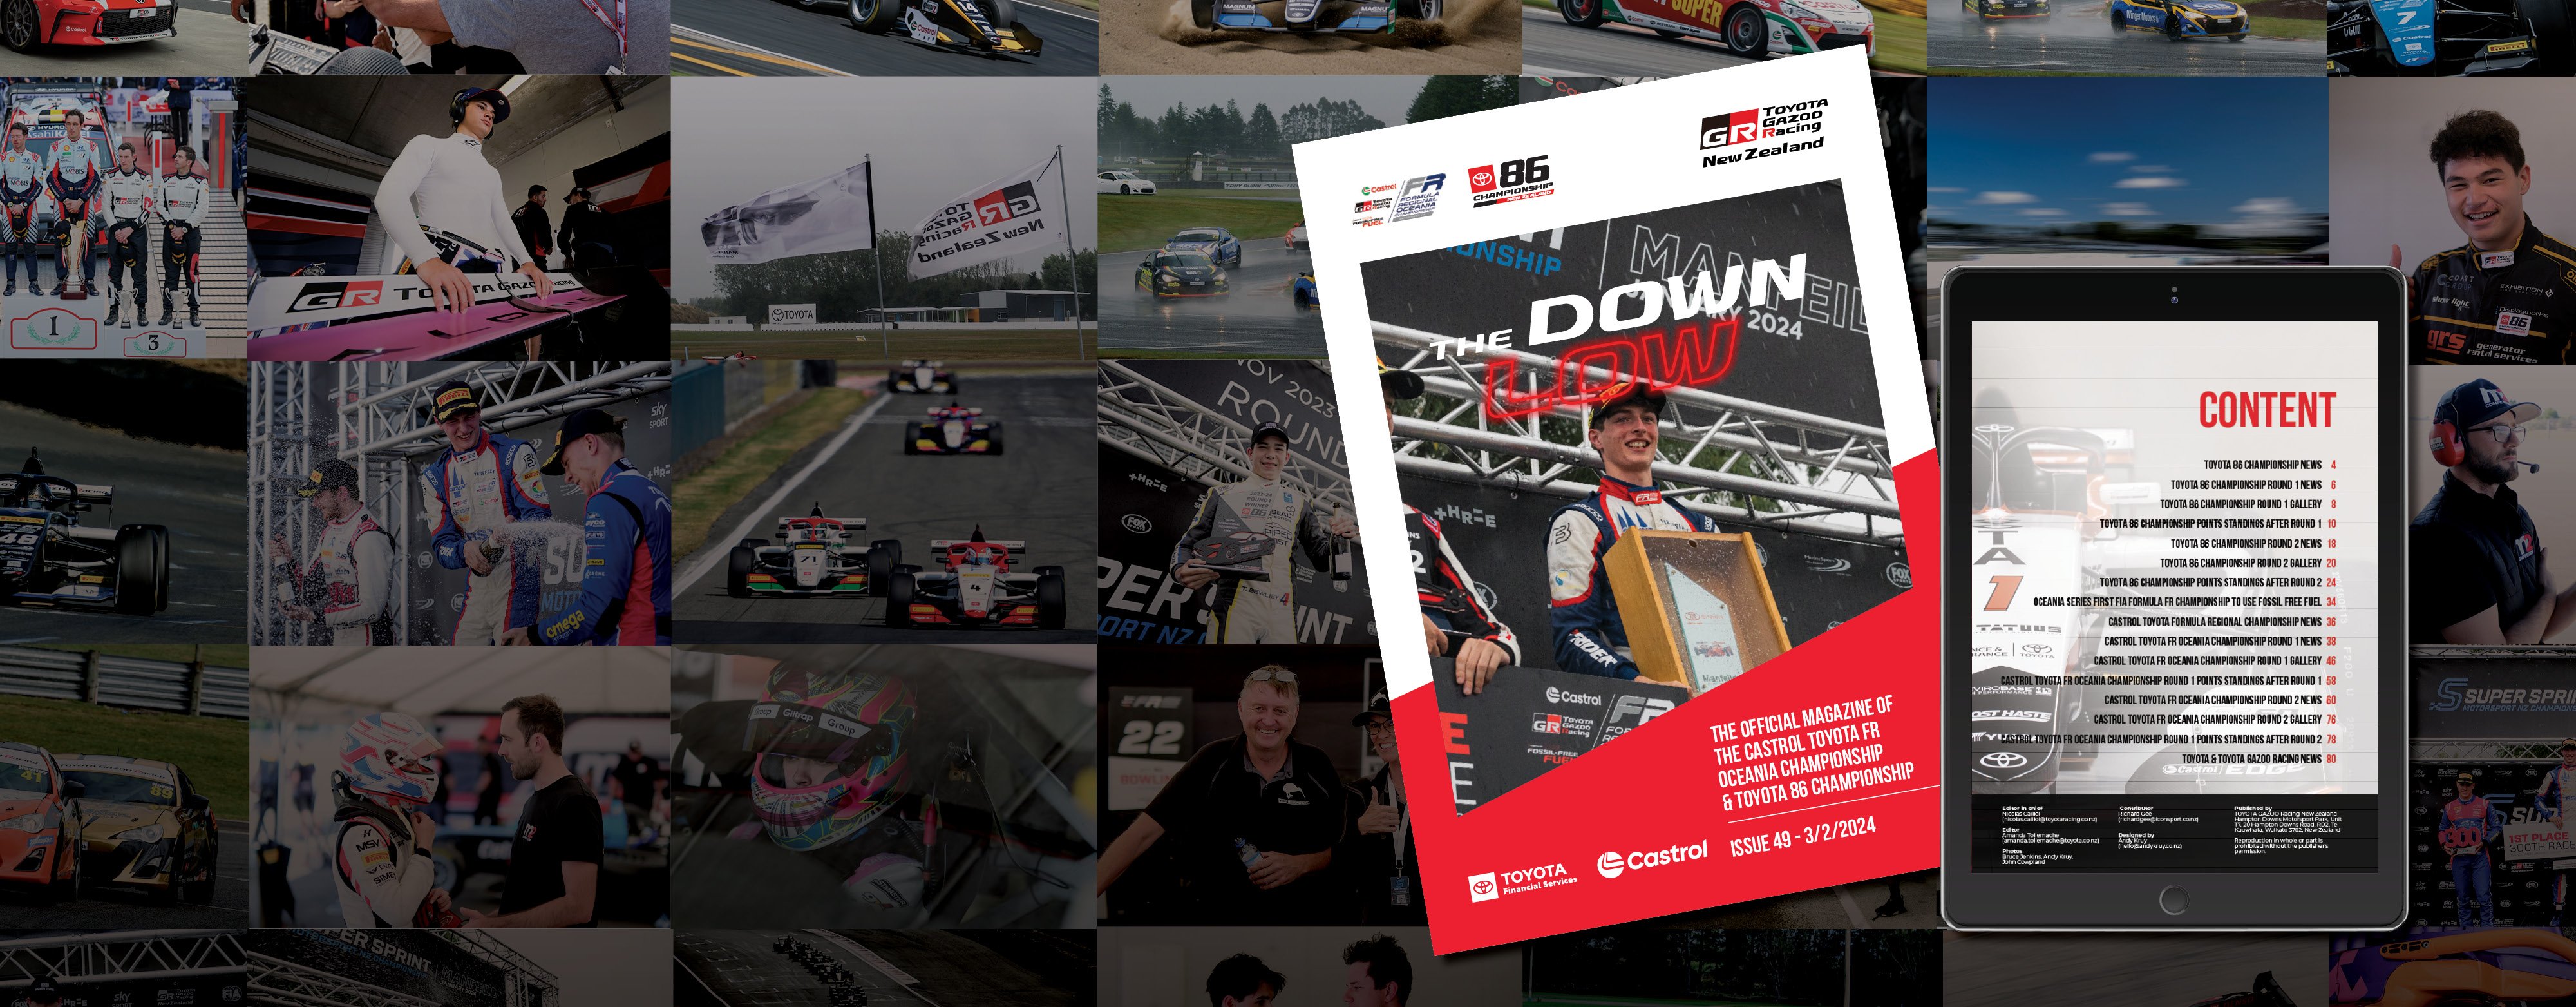 The Downlow Website banner Issue 49